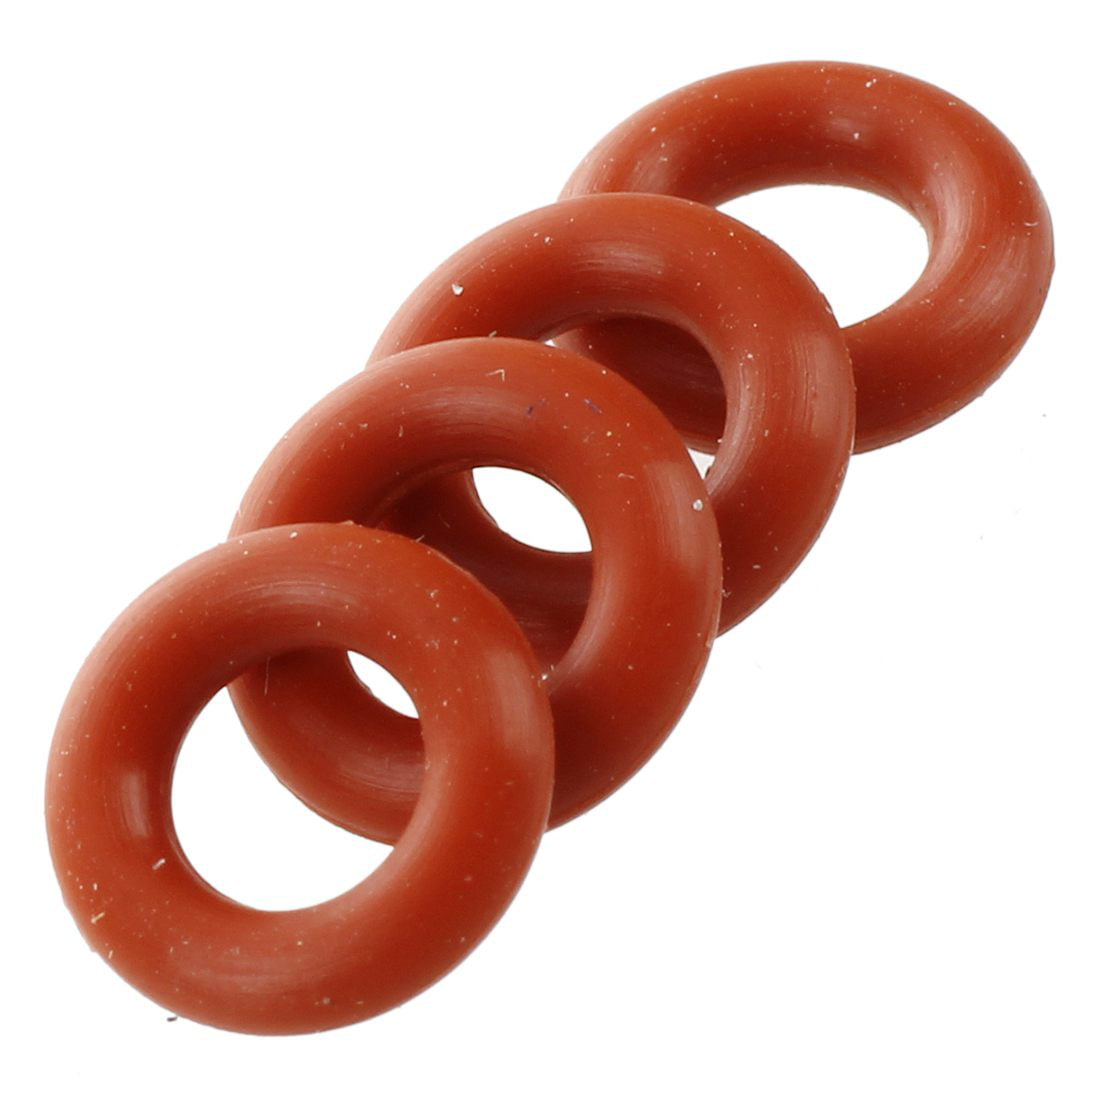 50 Pcs Silicone O Ring Seal Washers 8mm x 4mm x 2mm Red O8M3 